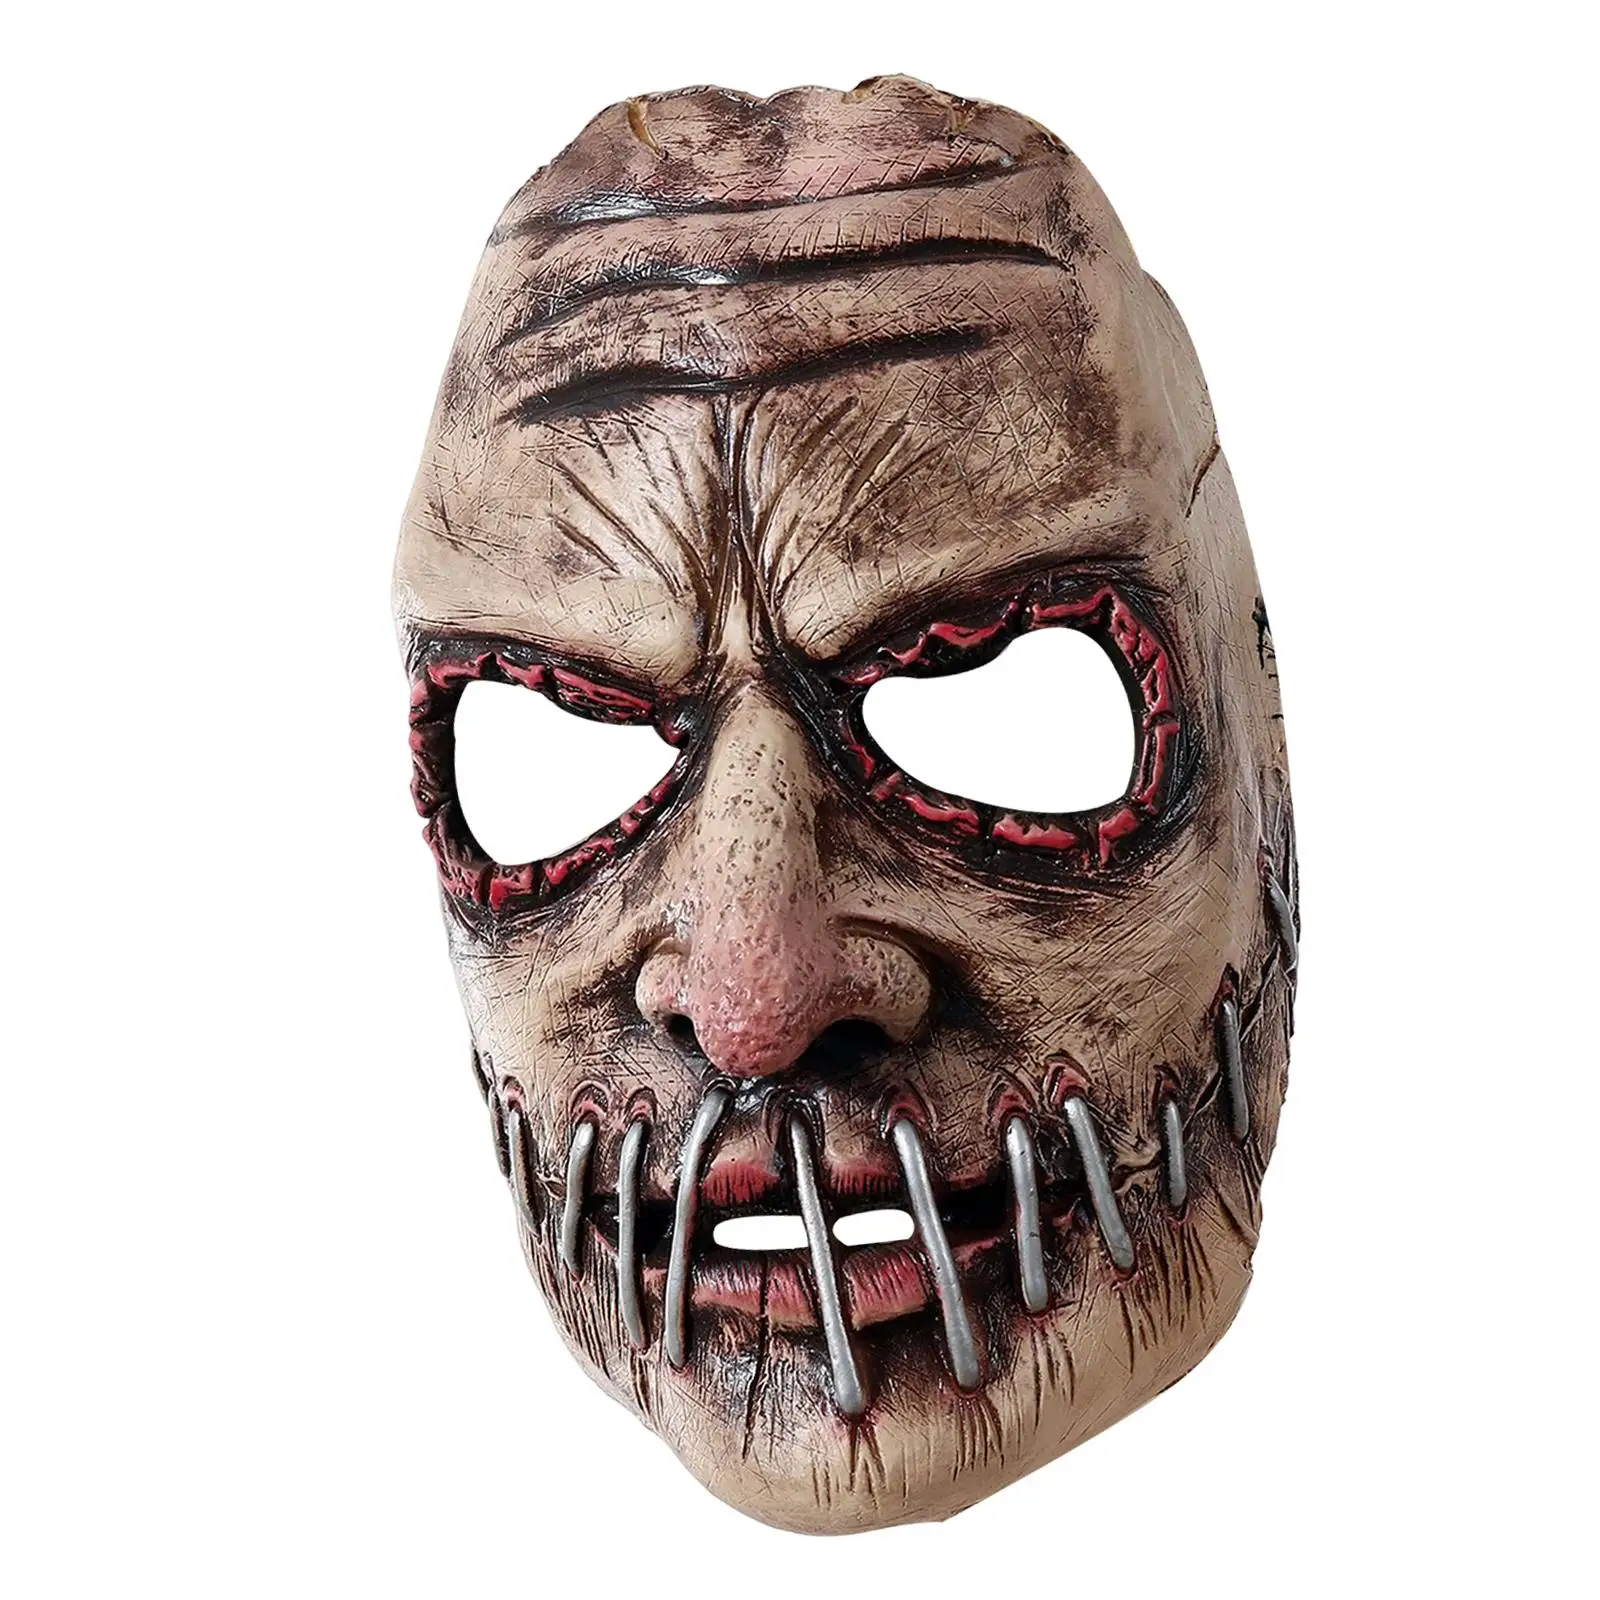 Halloween Horror Mask Costume Accessories Face Cover Decorative for Masquerade Pretend stage Performance Decoration Holiday